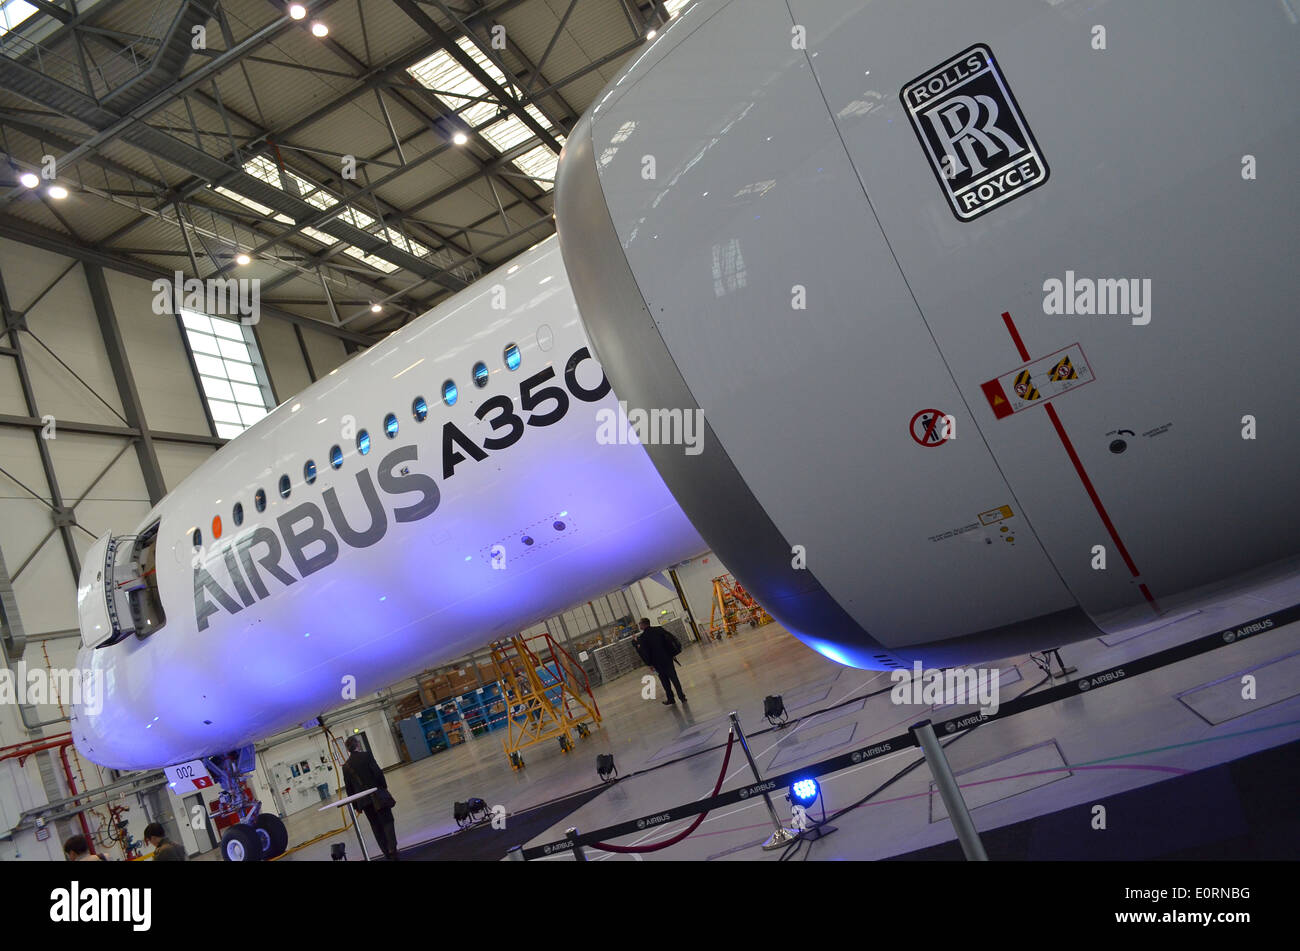 An Airbus A350XWB at the Airbus headquarters in Finkenwerder, Hamburg, Germany Stock Photo